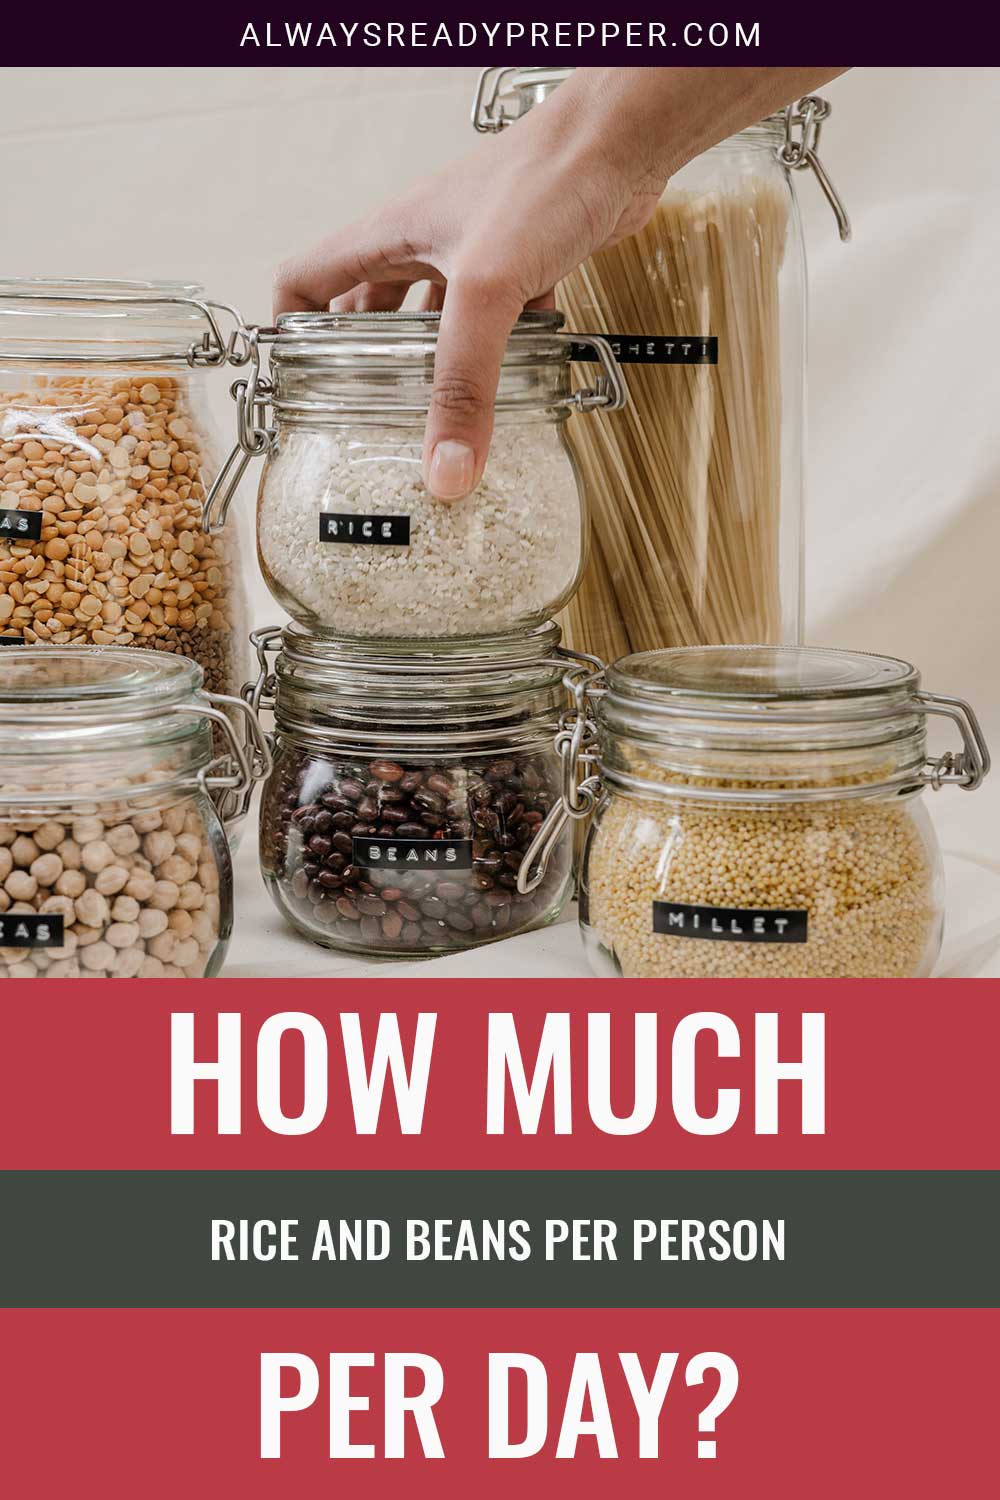 Glass jars of rice, beans, millets etc - How Much Rice And Beans Per Person Per Day?